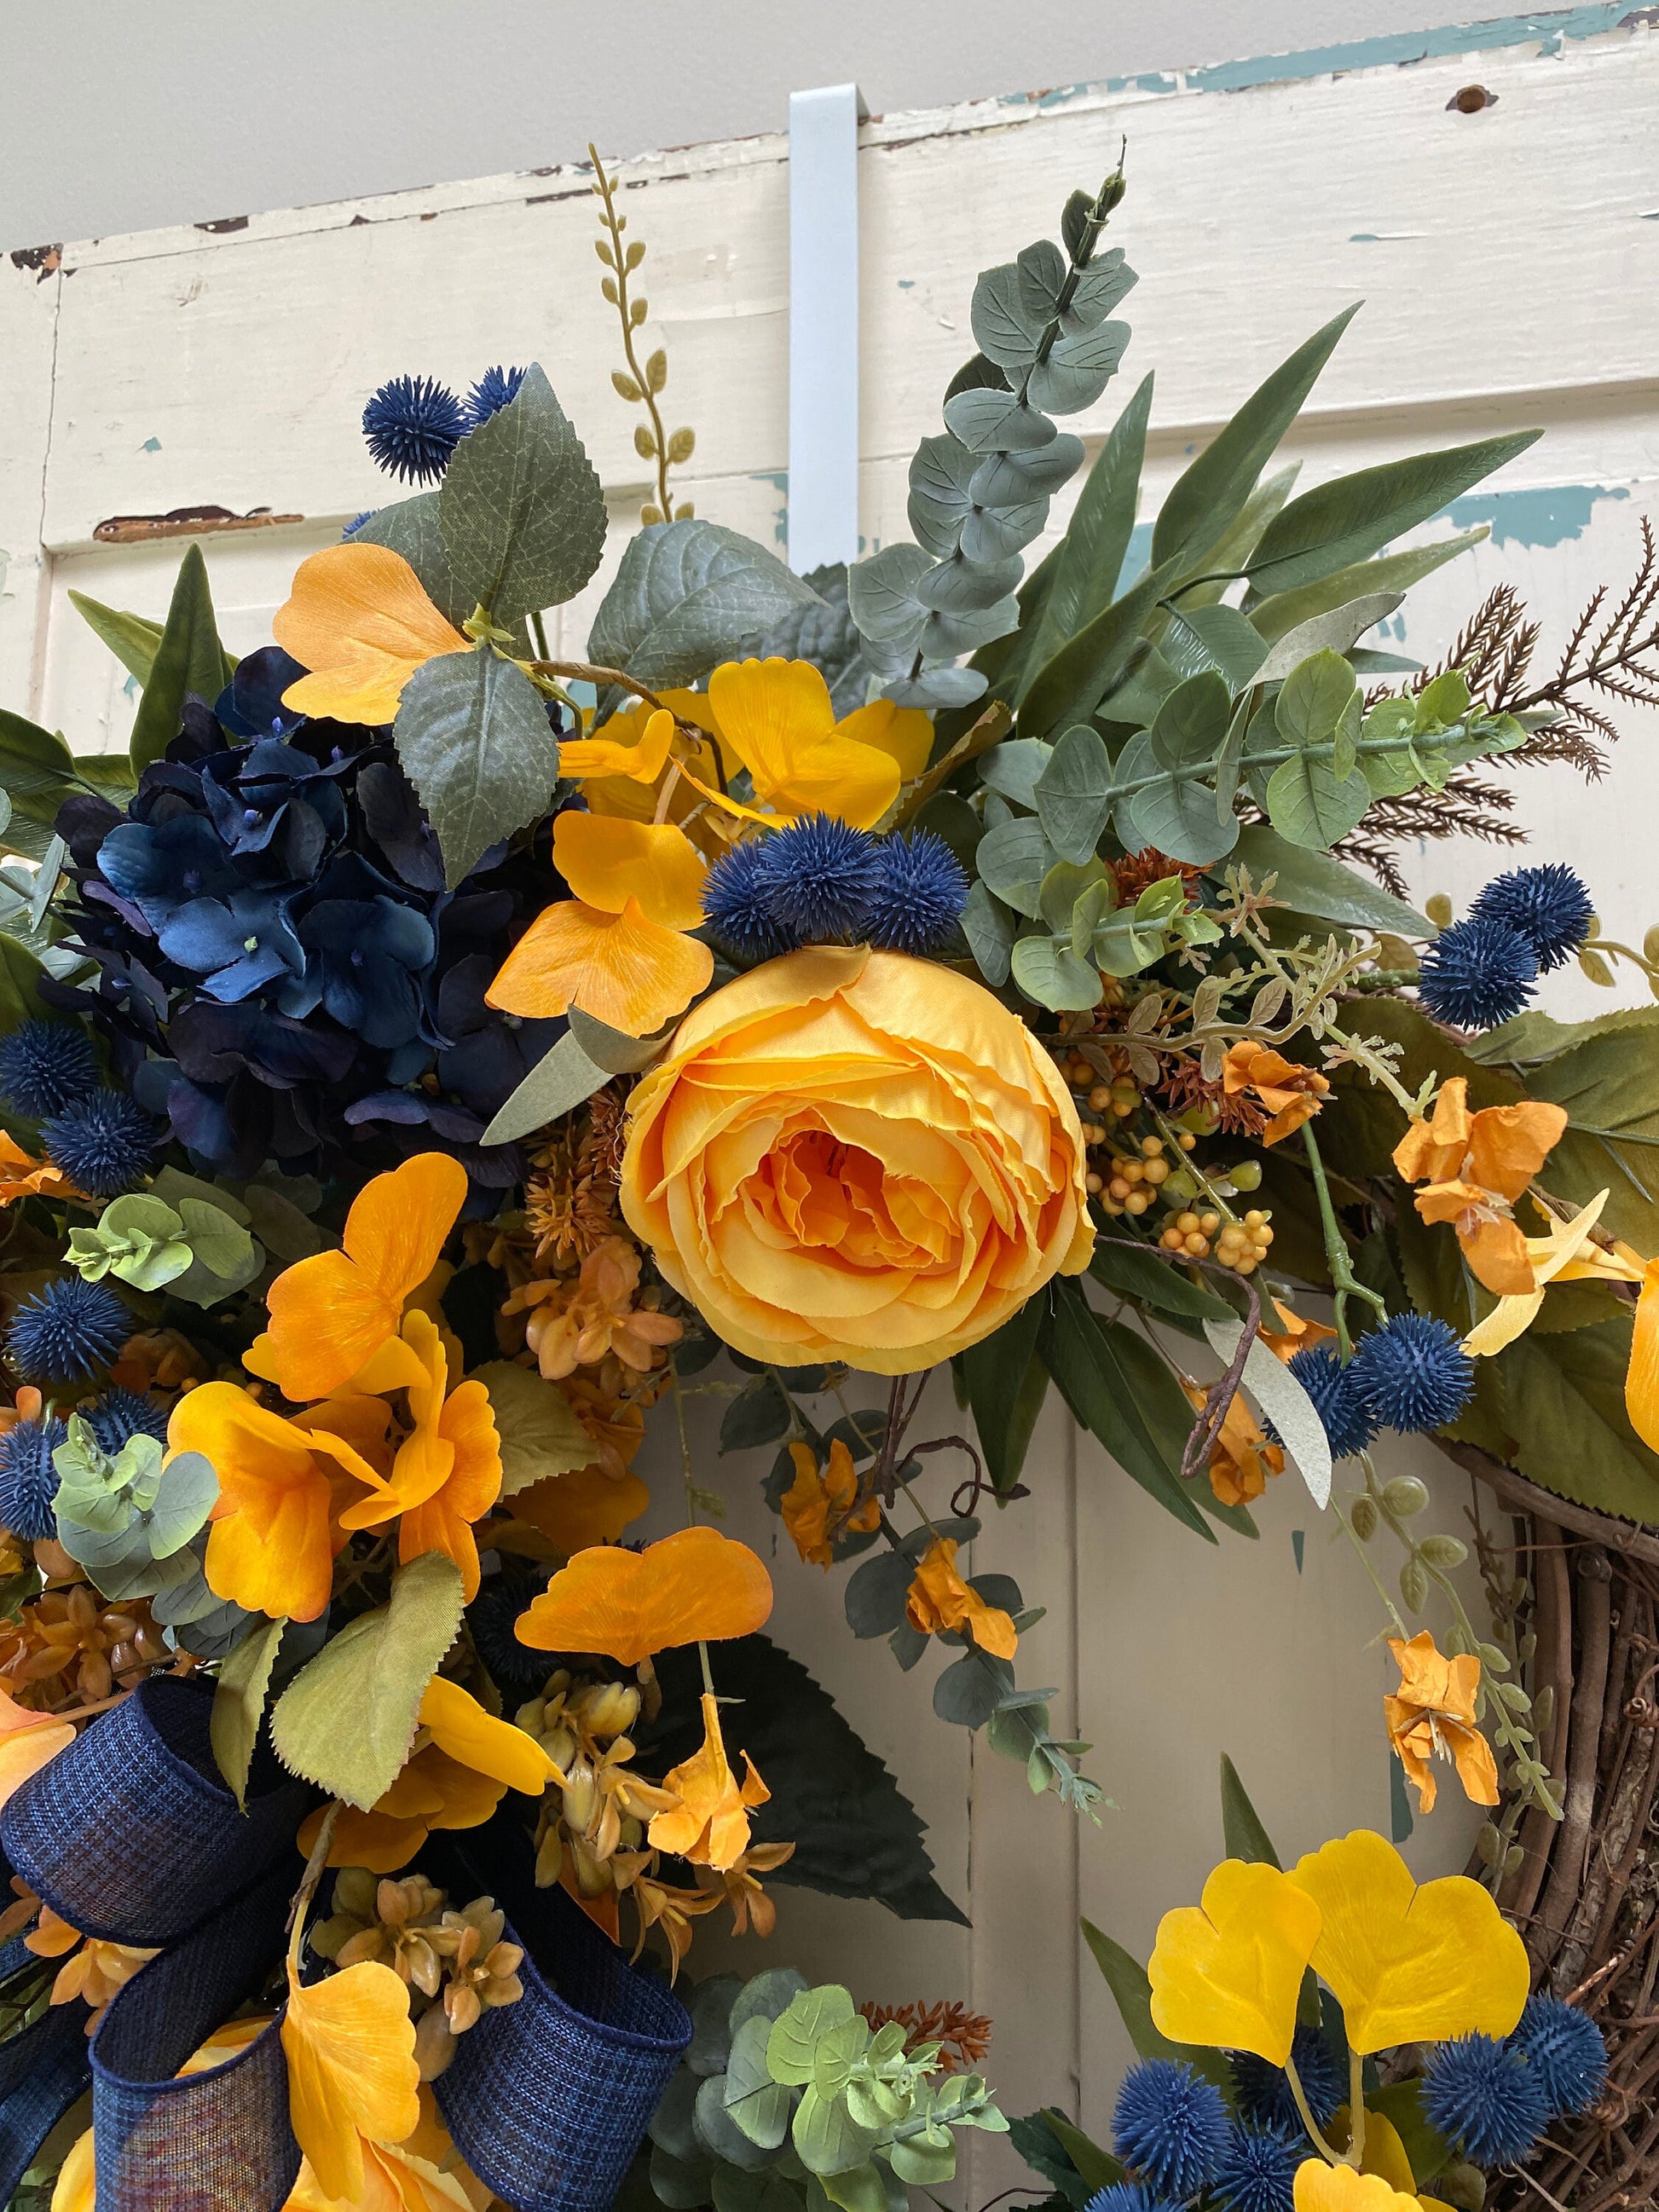 Fall Floral Wreath with Navy Blue and Golden Autumn Colors for Front Door, Navy Blue Hygrangea Wreath for Michigan Sports Lover